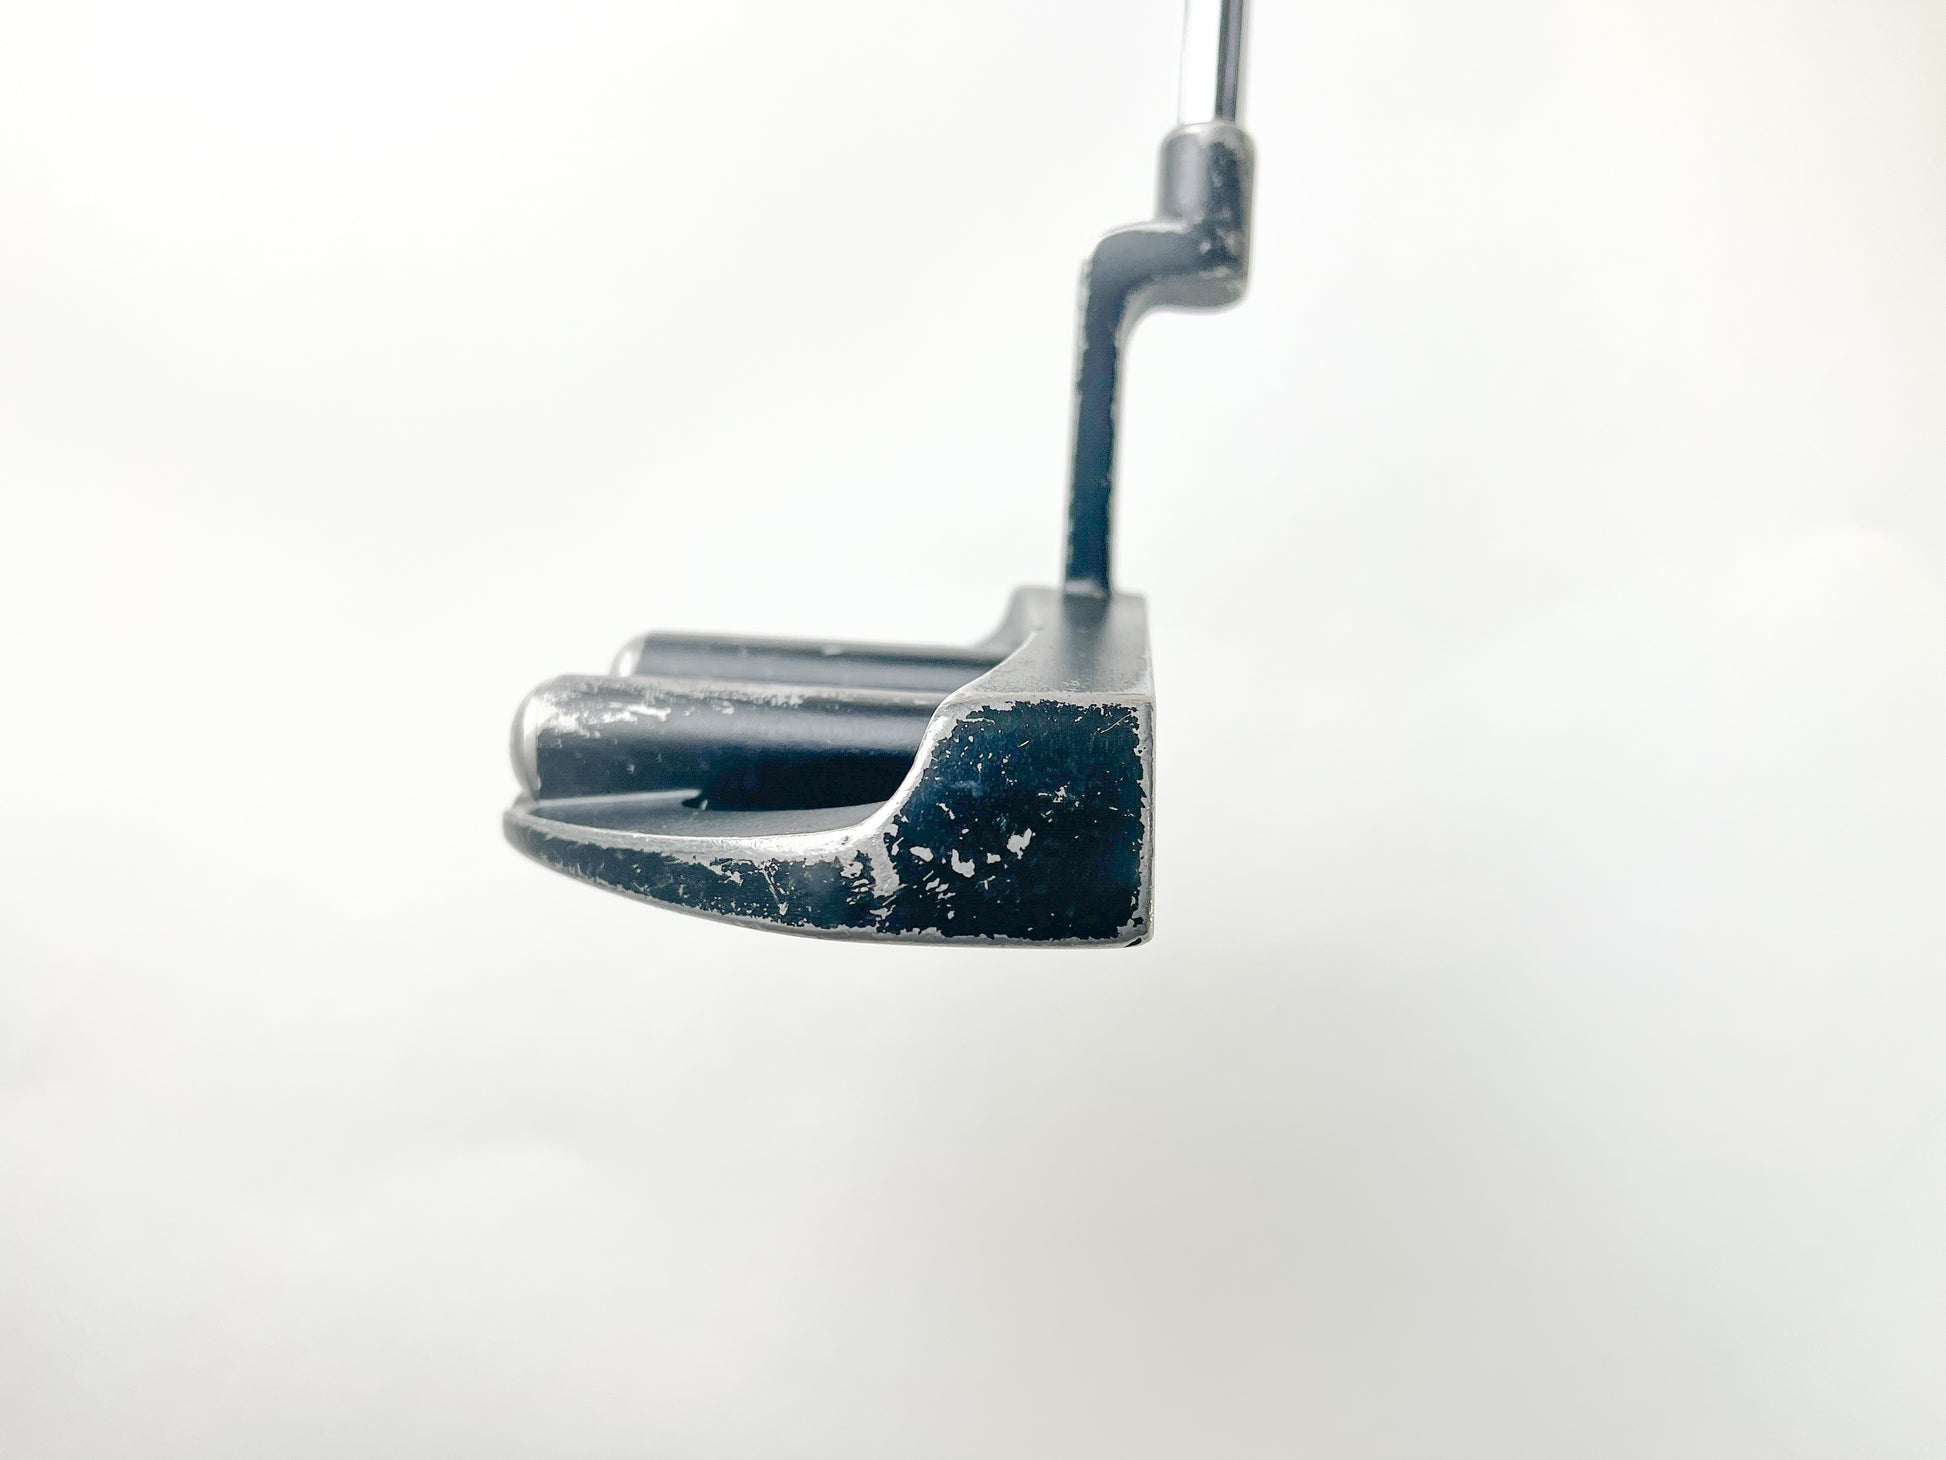 Used Rife Vault 001 Legend Two Bar Putter - Right-Handed - 32 in - Mallet-Next Round